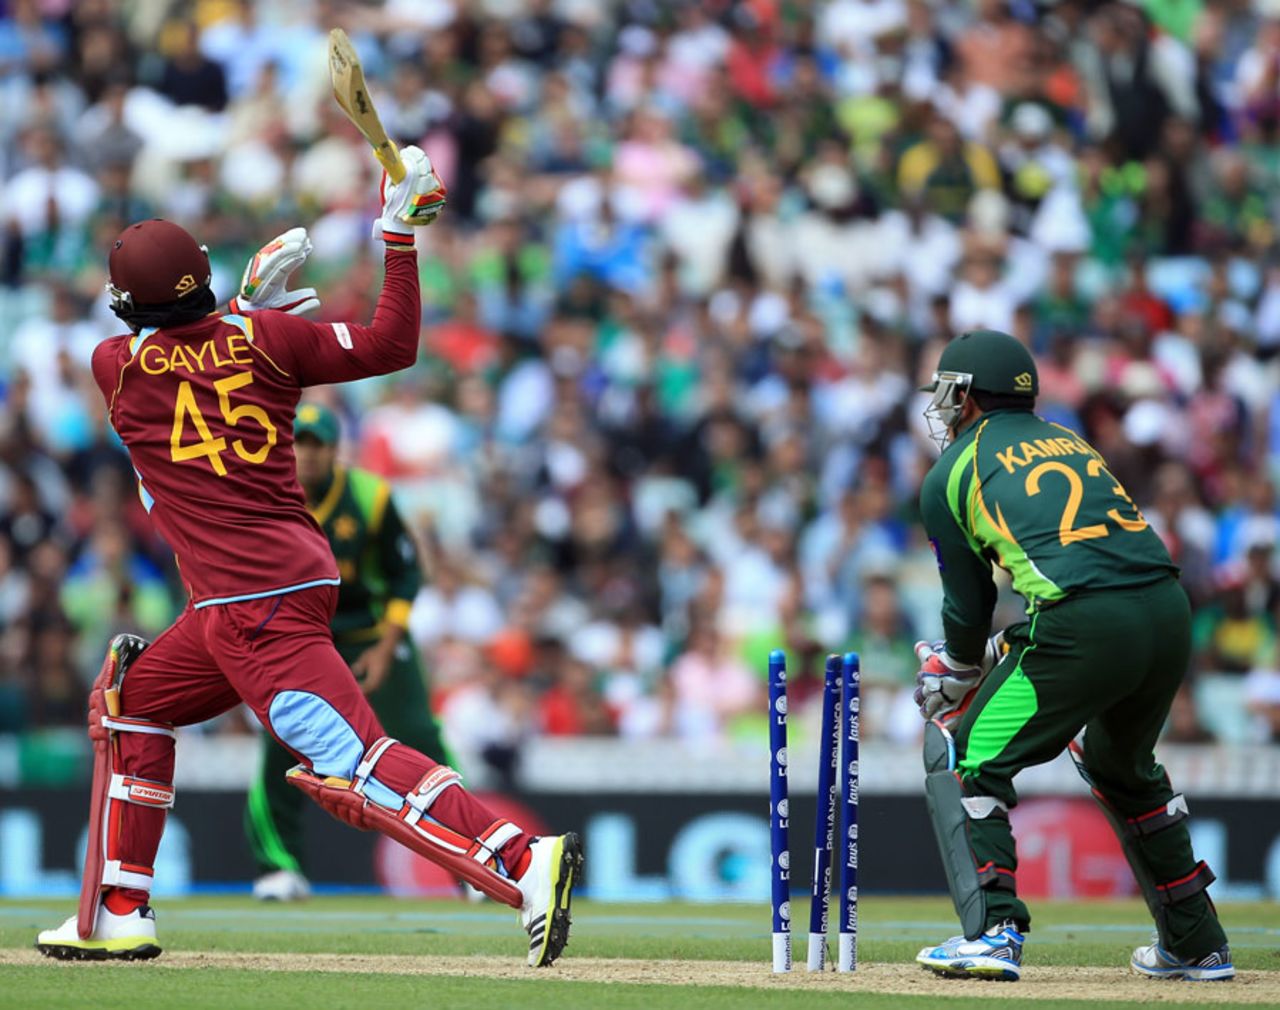 Chris Gayle swings and misses, West Indies v Pakistan, Champions Trophy, Group B, The Oval, June 7, 2013